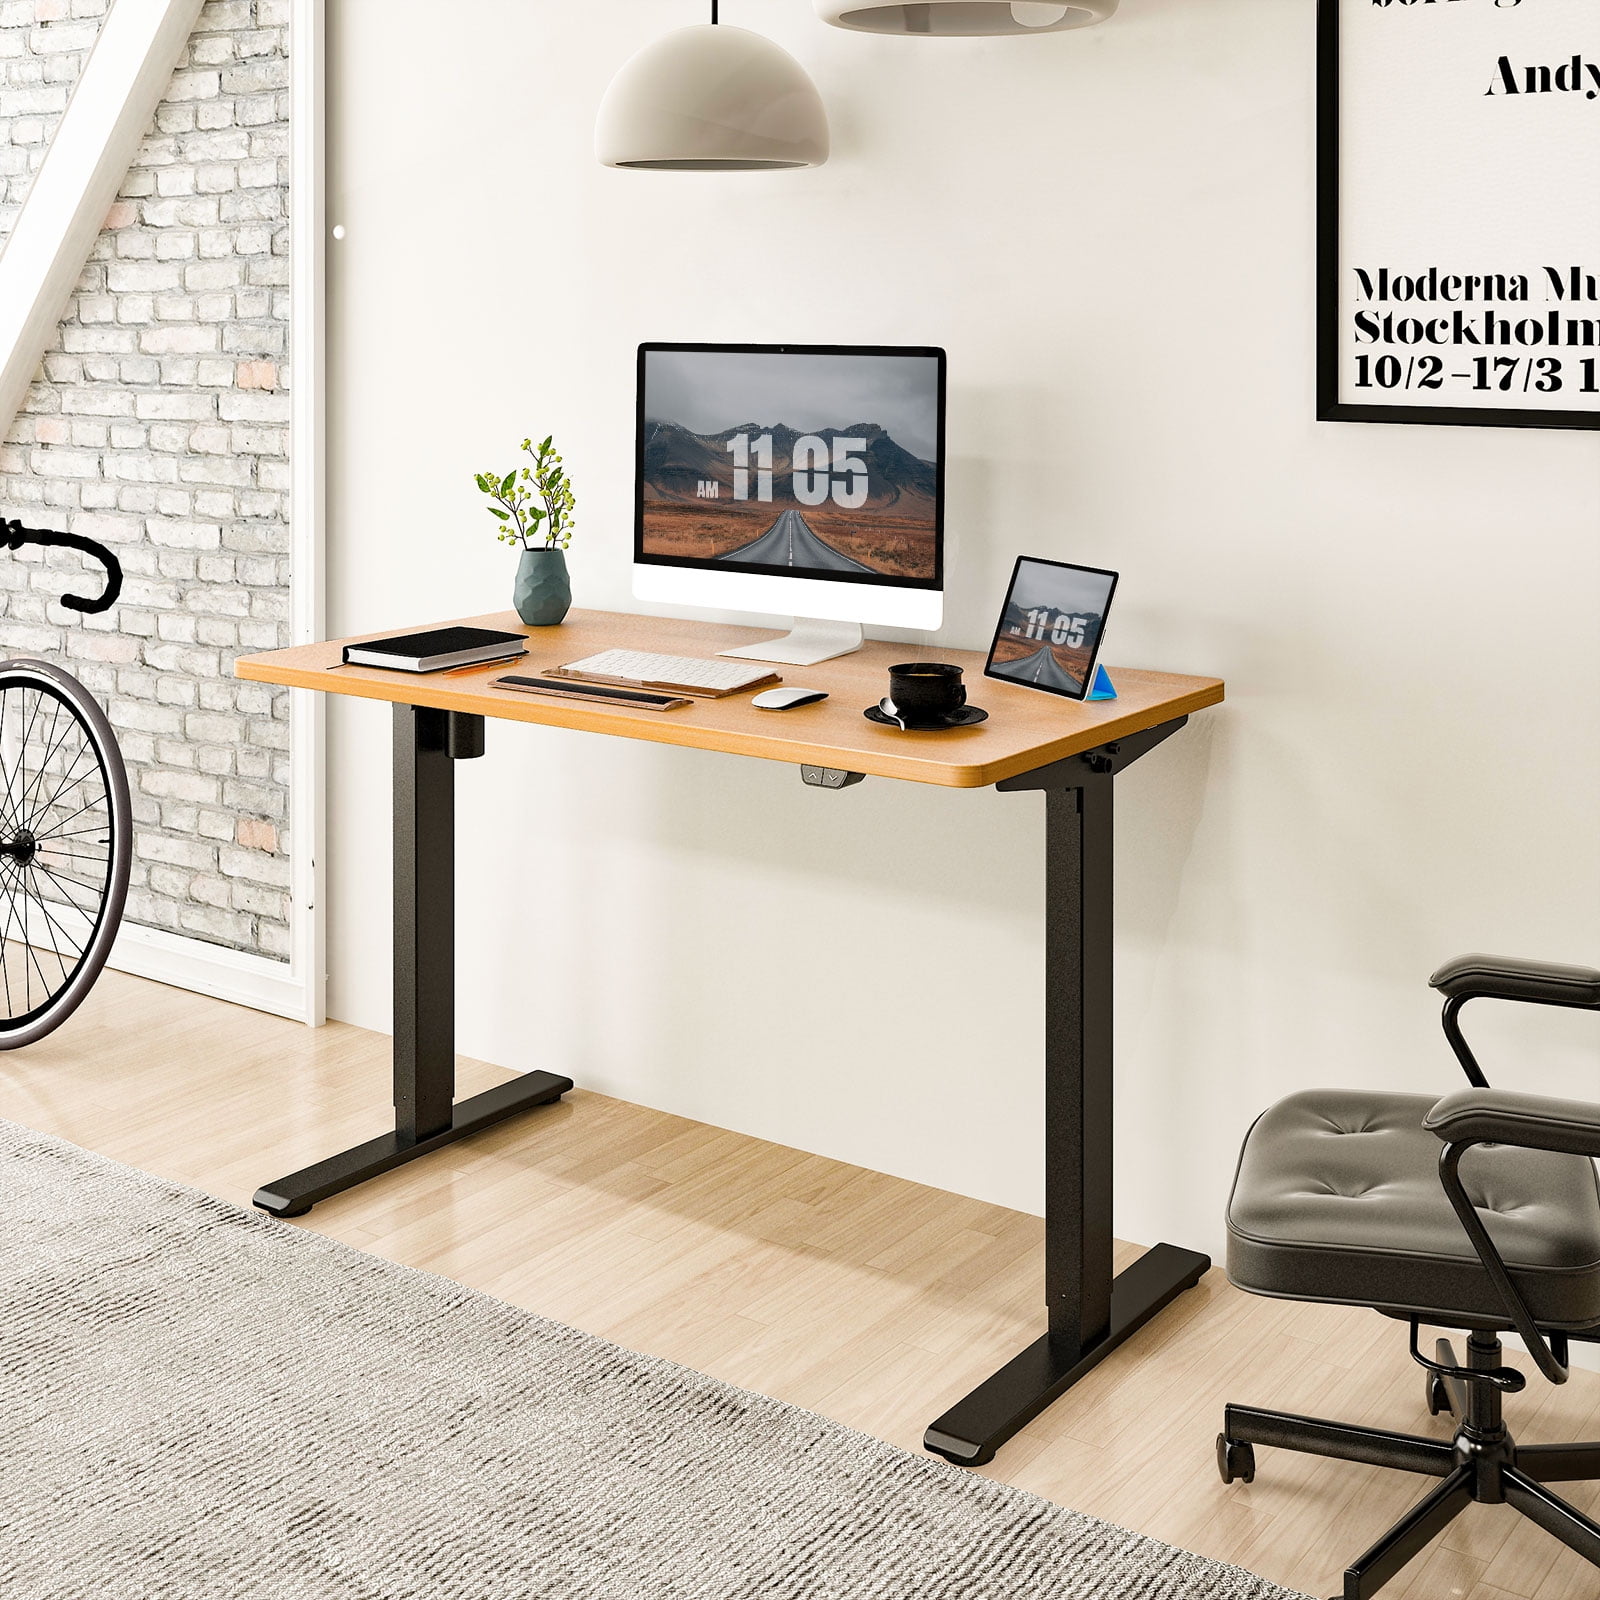 Black Frame + 48 in Mahogany Top 48 x 30 Inches Height Adjustable Desk Flexispot Electric Standing Desk Sit Stand Desk Base Home Office Table Stand up Desk 